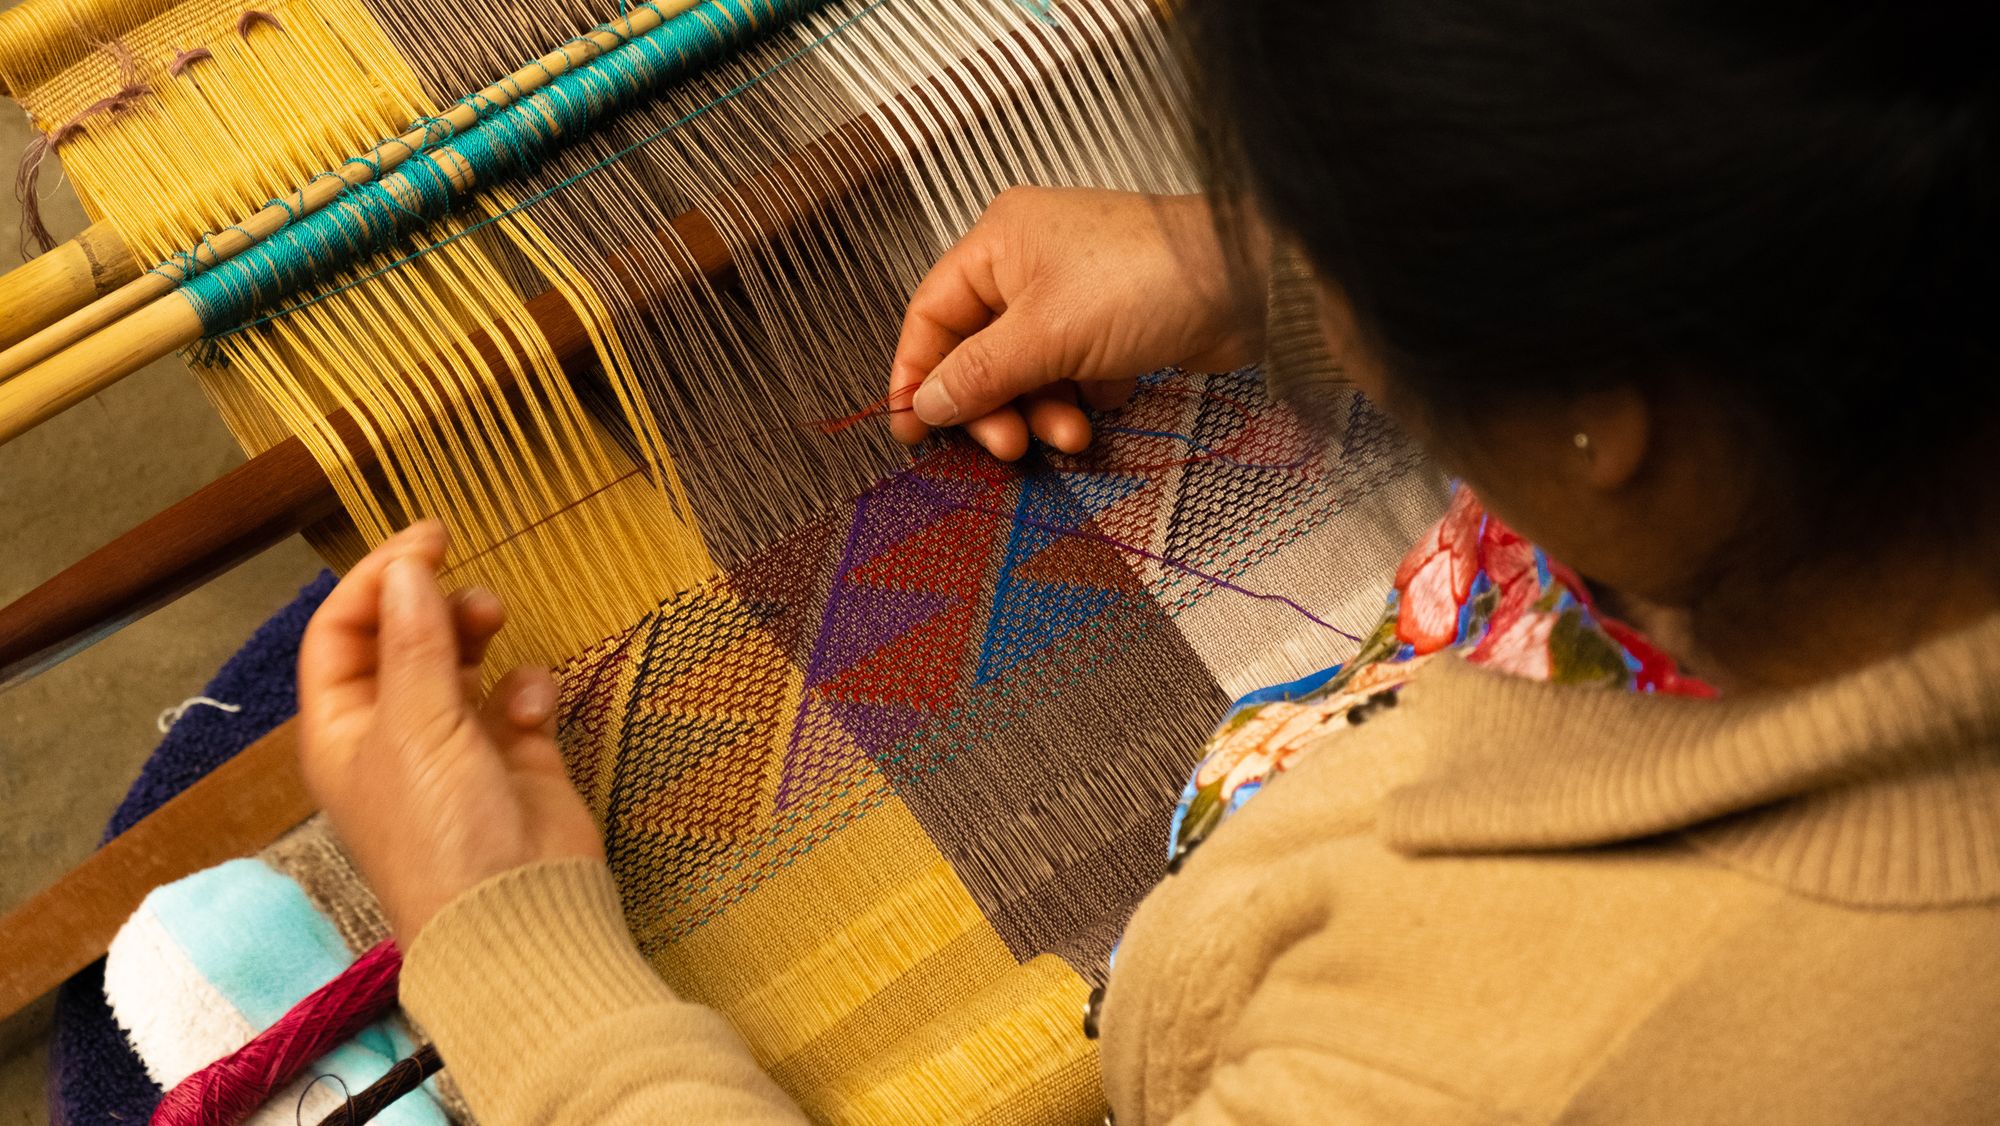 Woman making Hand-crafted Goods